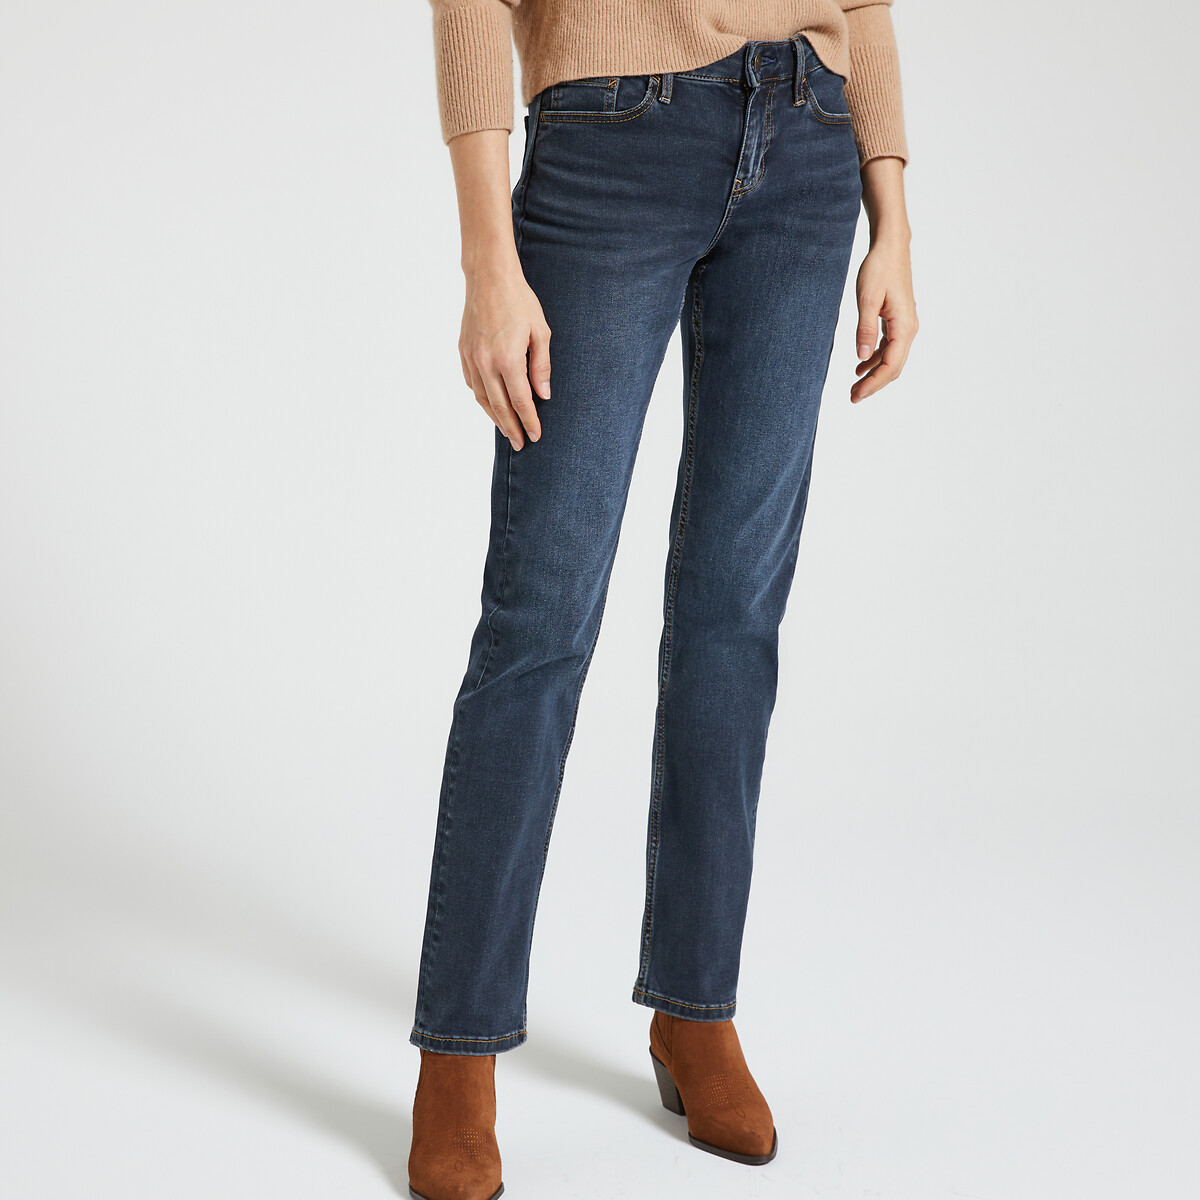 Mid Rise Straight Jeans, Length 32"